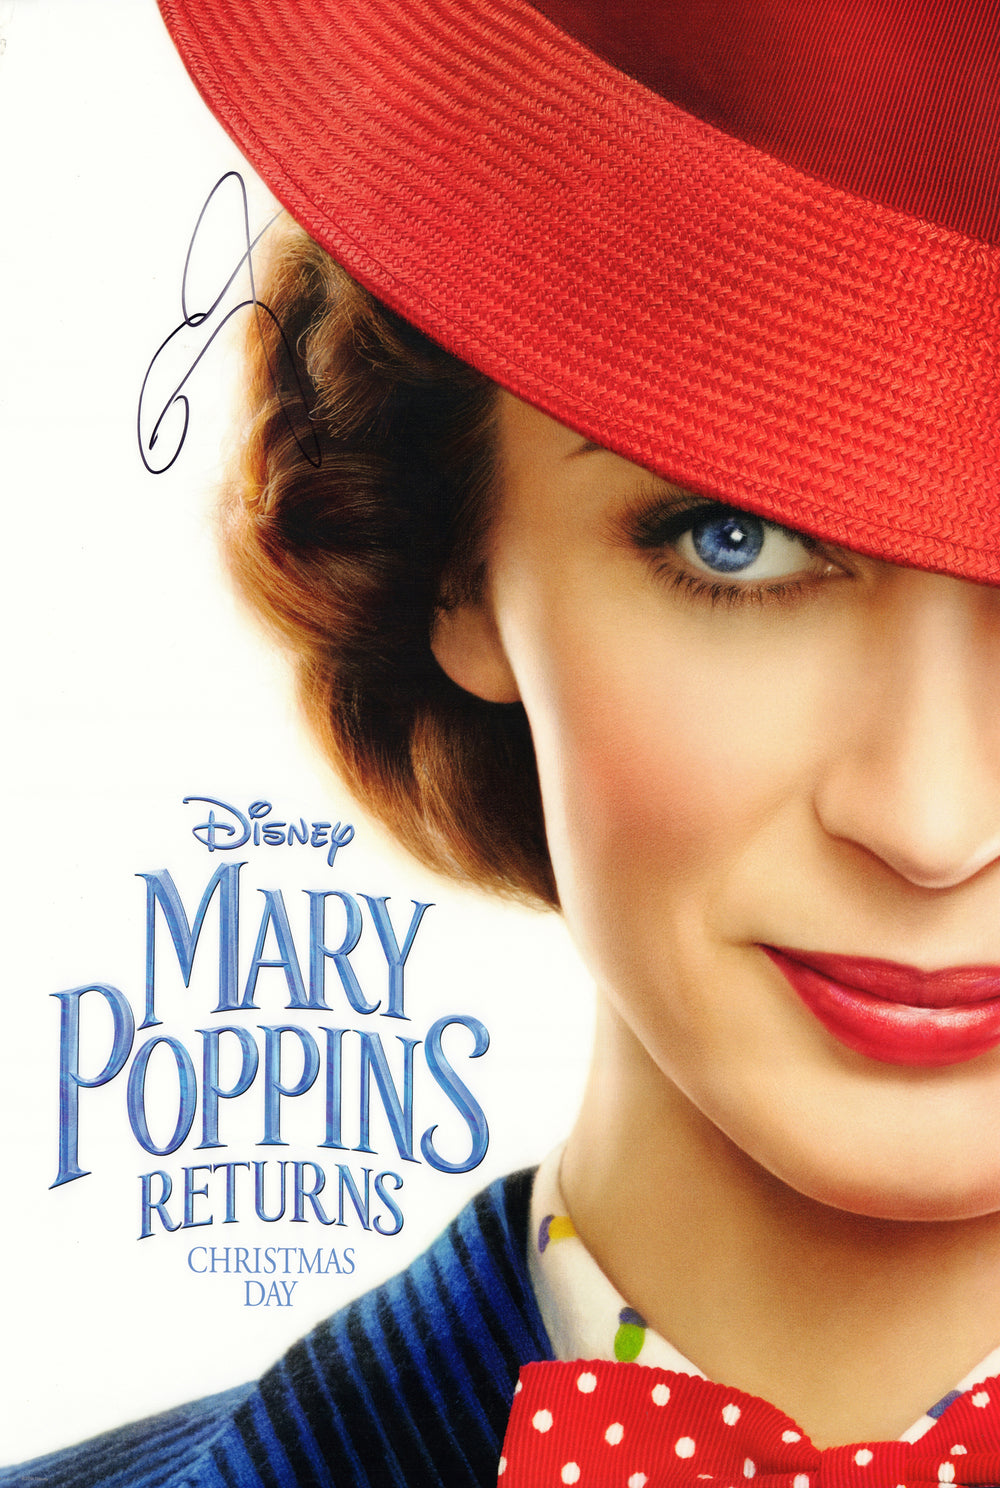 Emily Blunt as Mary Poppins in Disney's Mary Poppins Returns Signed 27x40 Poster